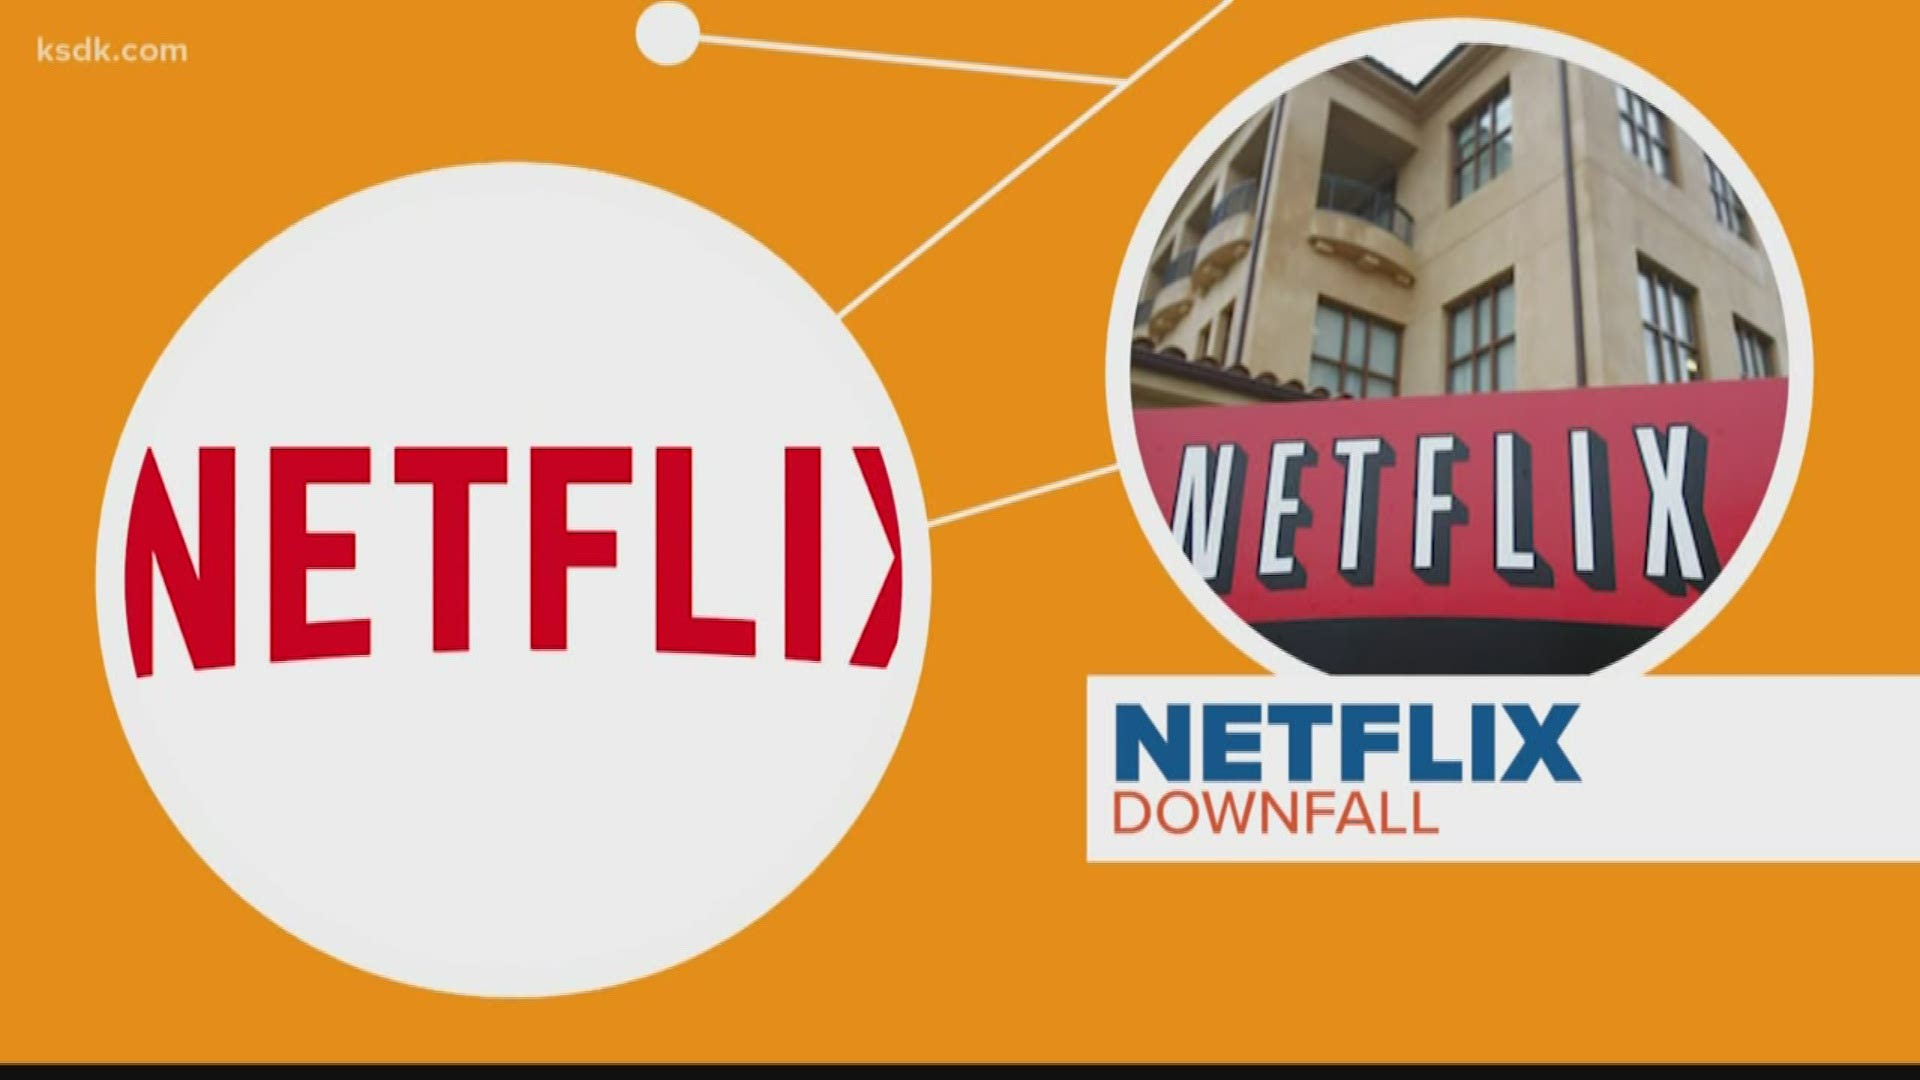 Despite success from its original shows and movies, could Netflix’s streaming superiority be in danger? Let’s connect the dots.